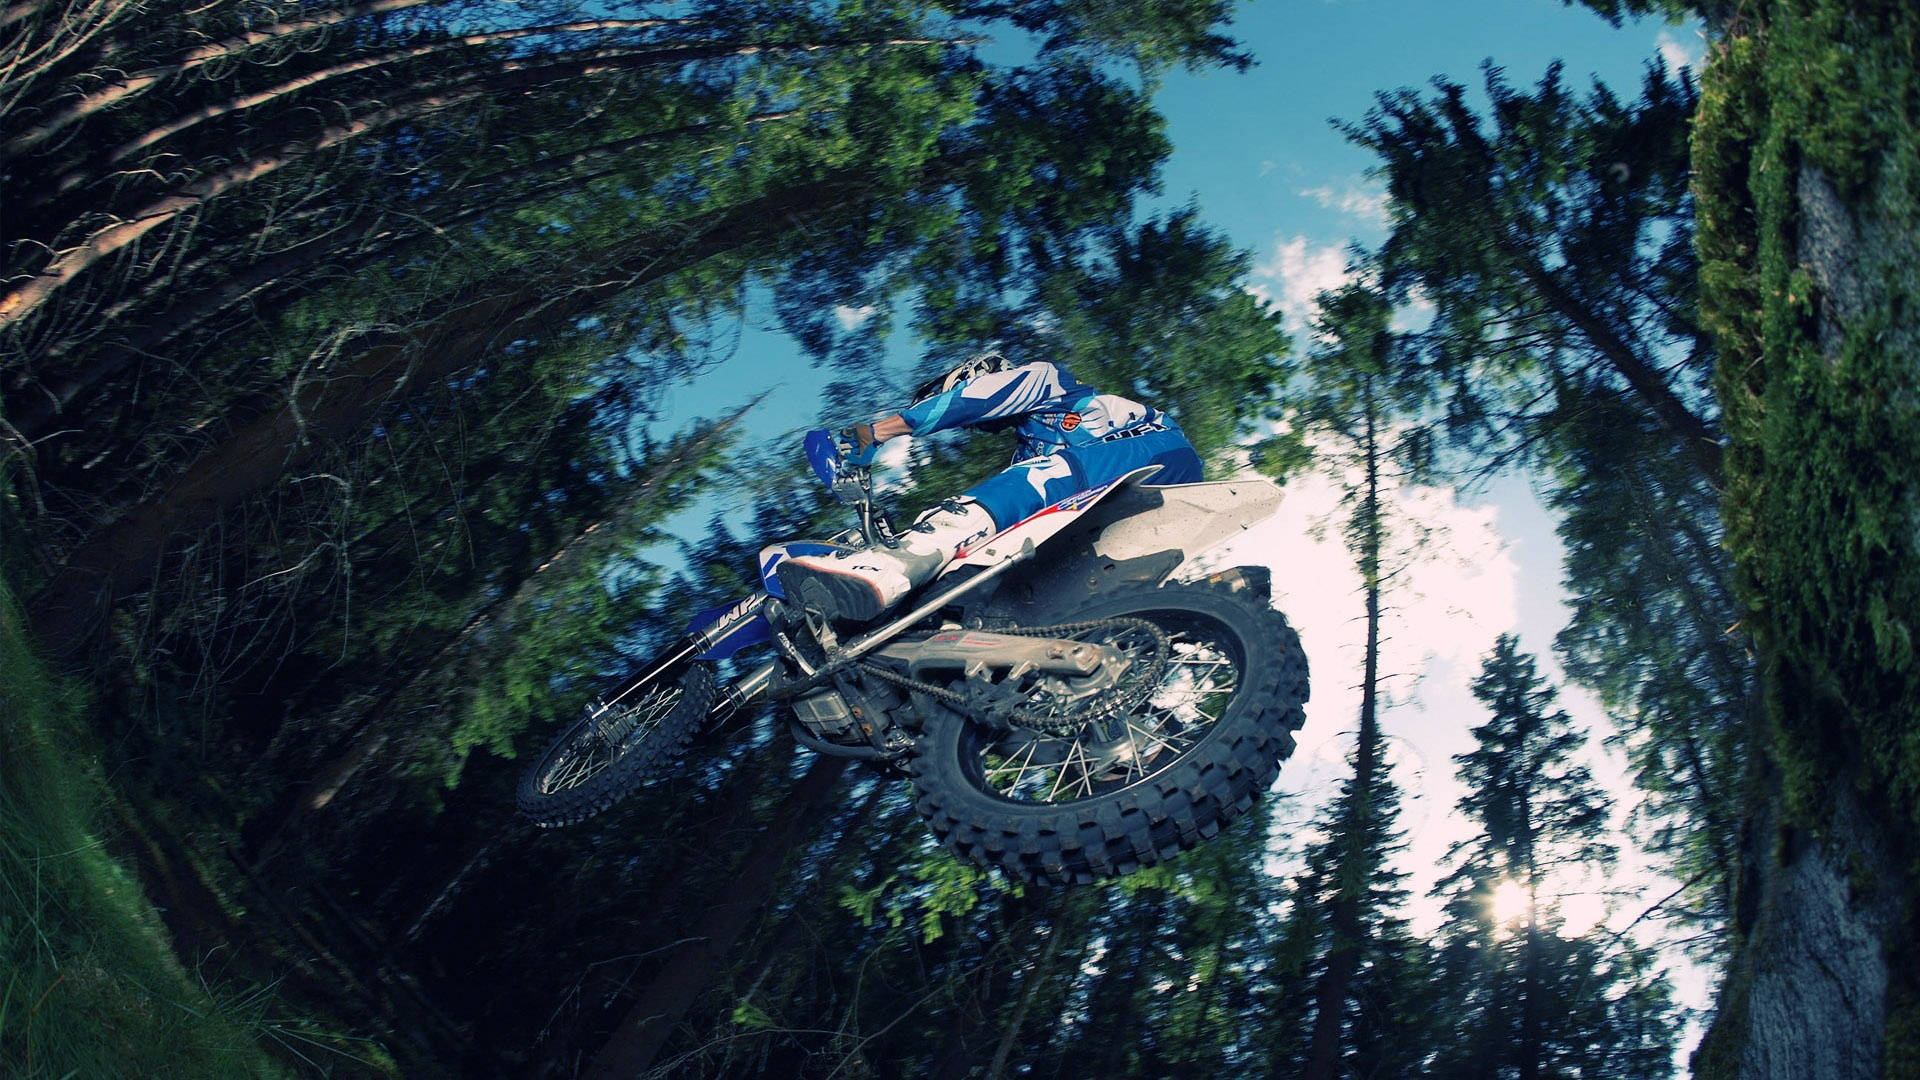 Thrilling Low Angle Shot Of A High-speed Dirt Bike